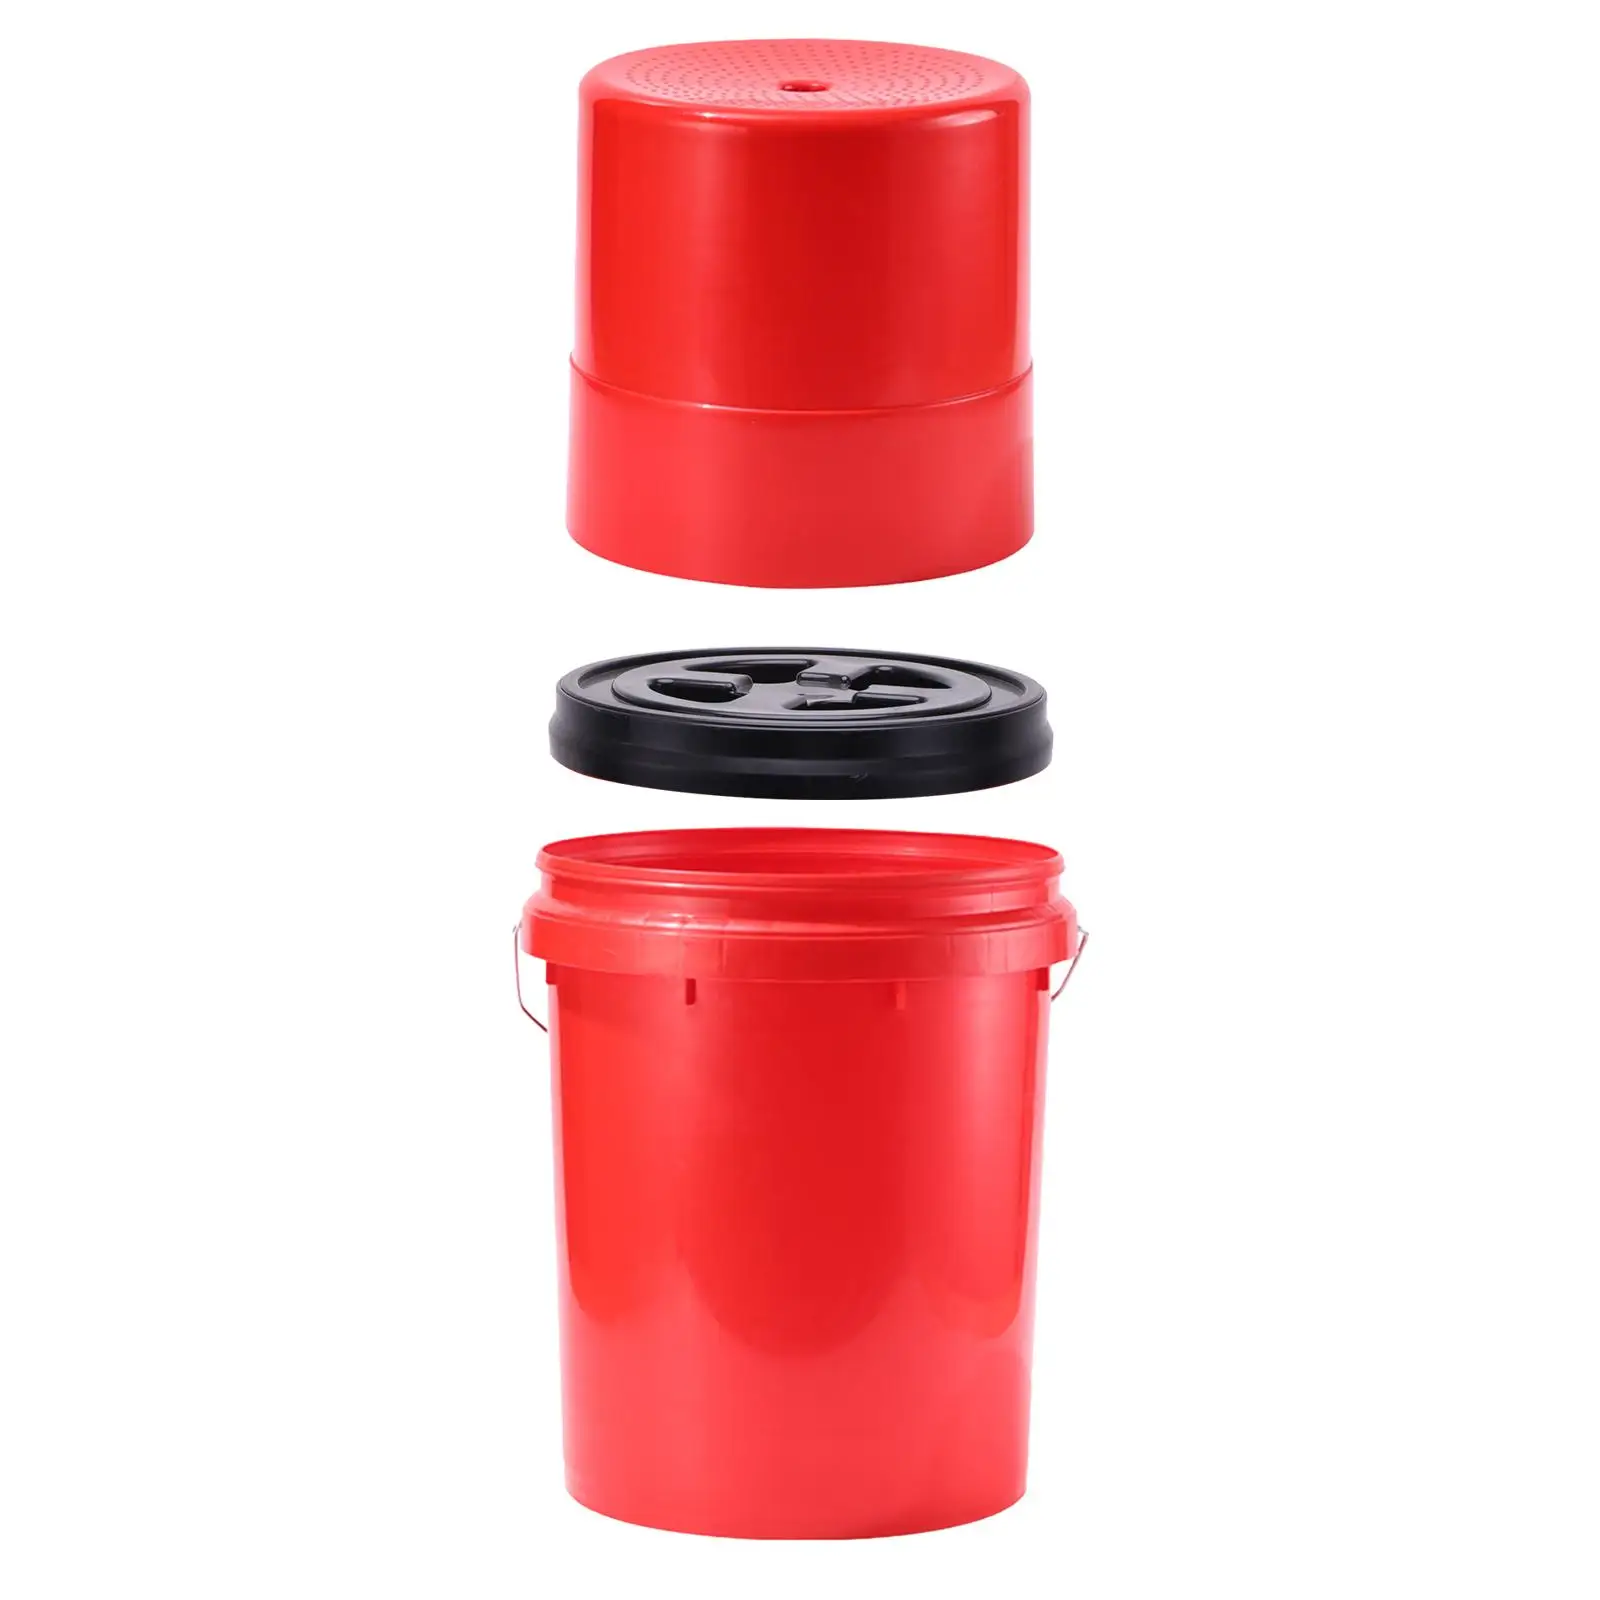 Car Washing Accessories Bucket Chair for Car Wash Painting Assistance